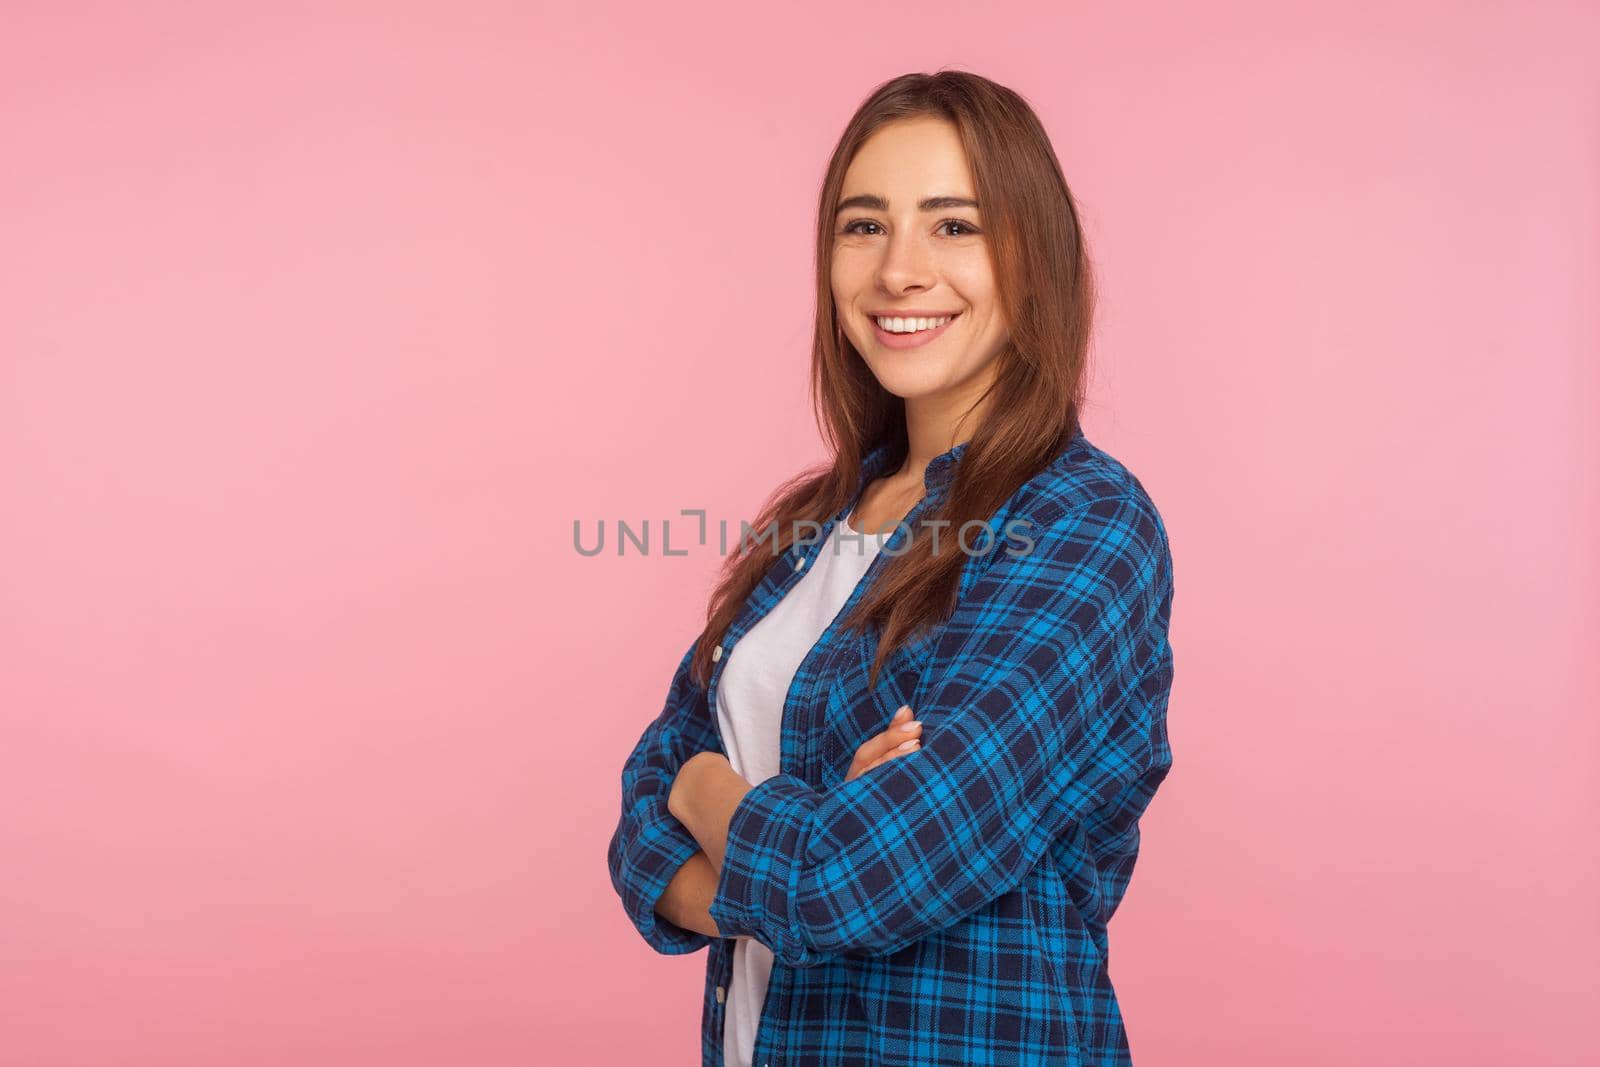 Portrait of cheerful girl in checkered shirt smiling sincerely at camera, holding hands crossed, looking confident and contented with life, rejoicing positive news. indoor studio shot, pink background